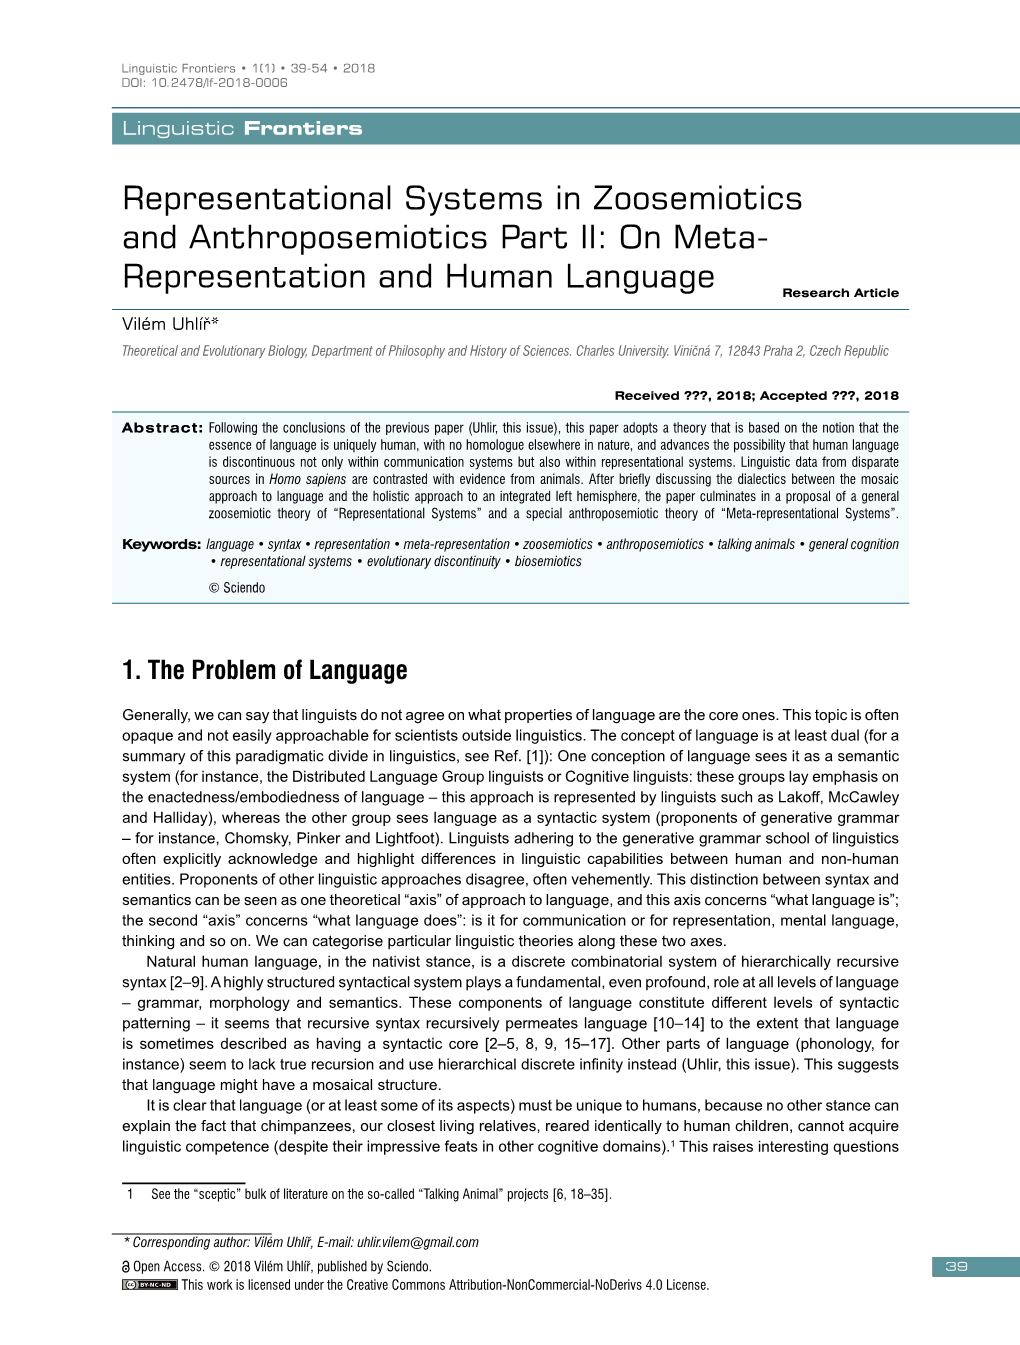 Representation and Human Language Research Article Vilém Uhlíř* Theoretical and Evolutionary Biology, Department of Philosophy and History of Sciences